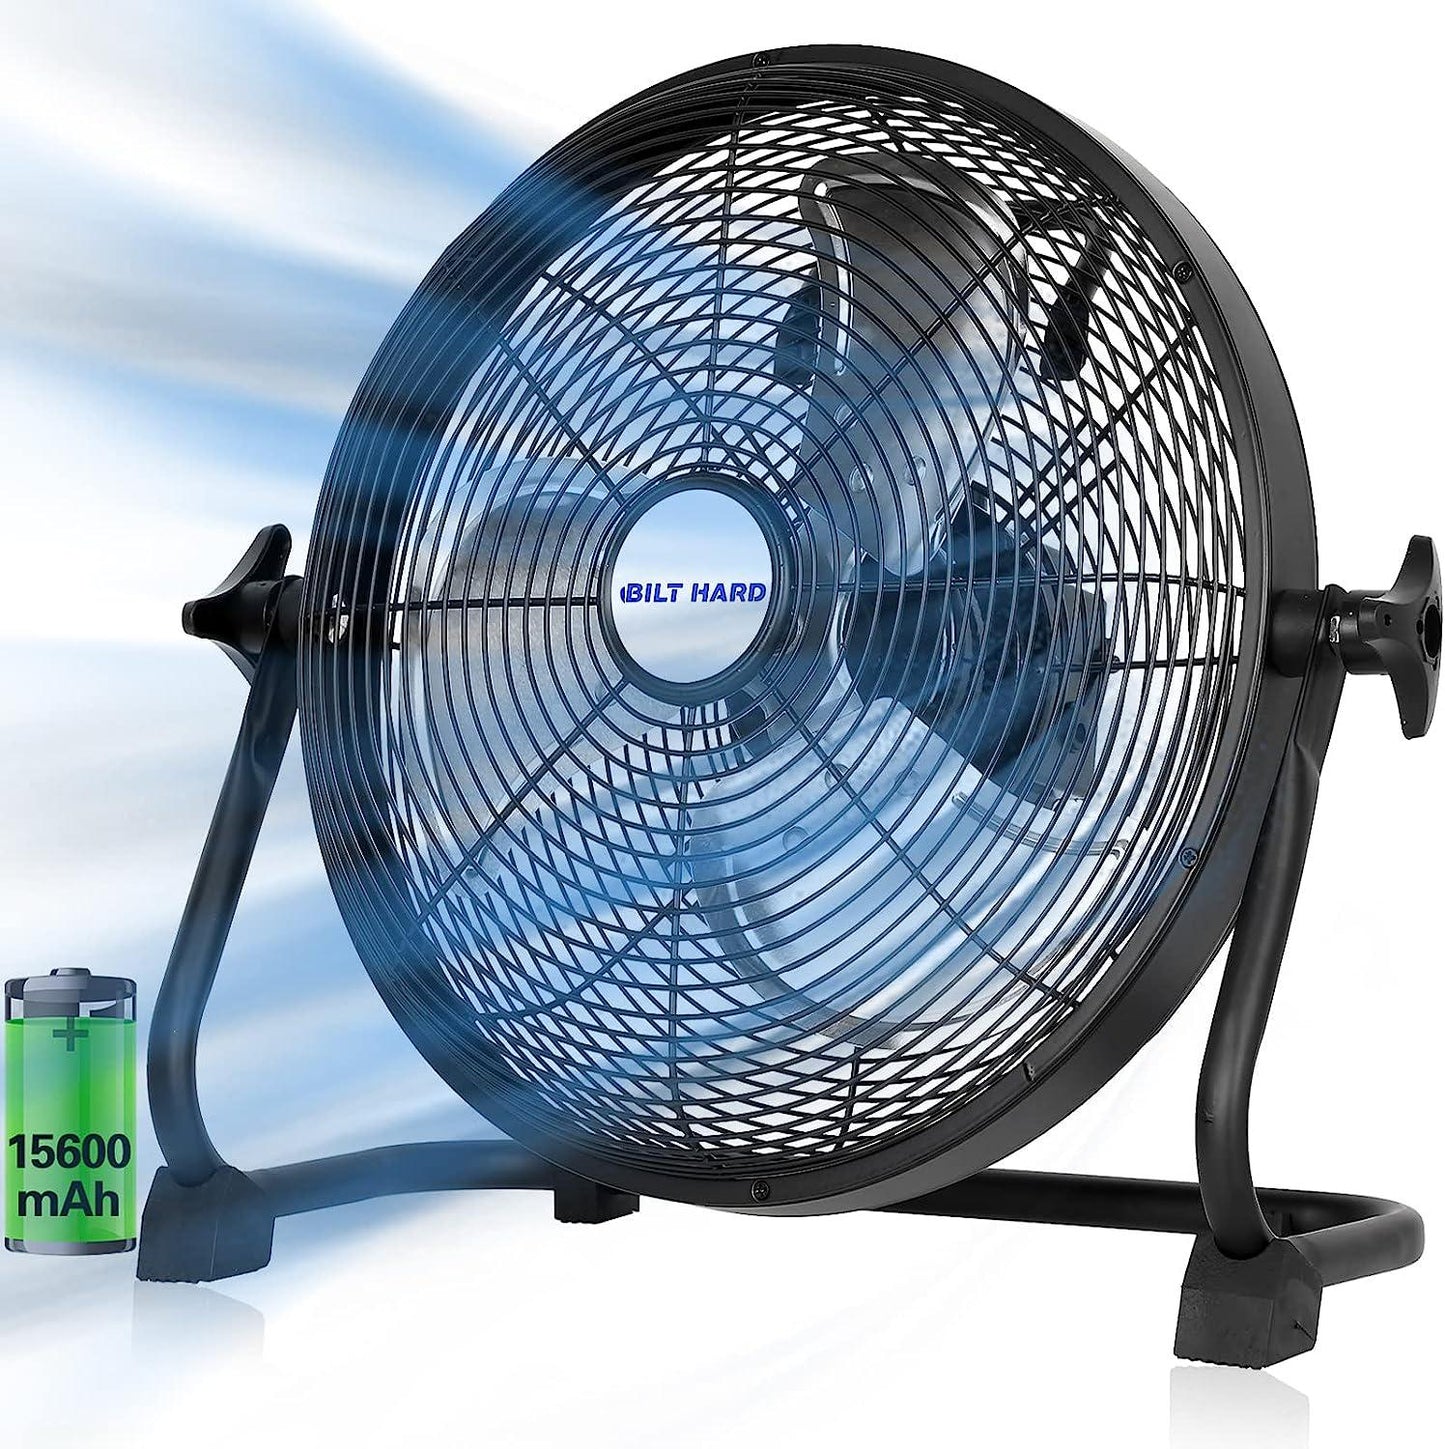 12 Rechargeable Battery Operated Outdoor Floor Fan, 15600mAh Battery Powered High Velocity Portable Fan with Metal Blade, USB Output for Camping, Travel, Backyard, Run All Day-